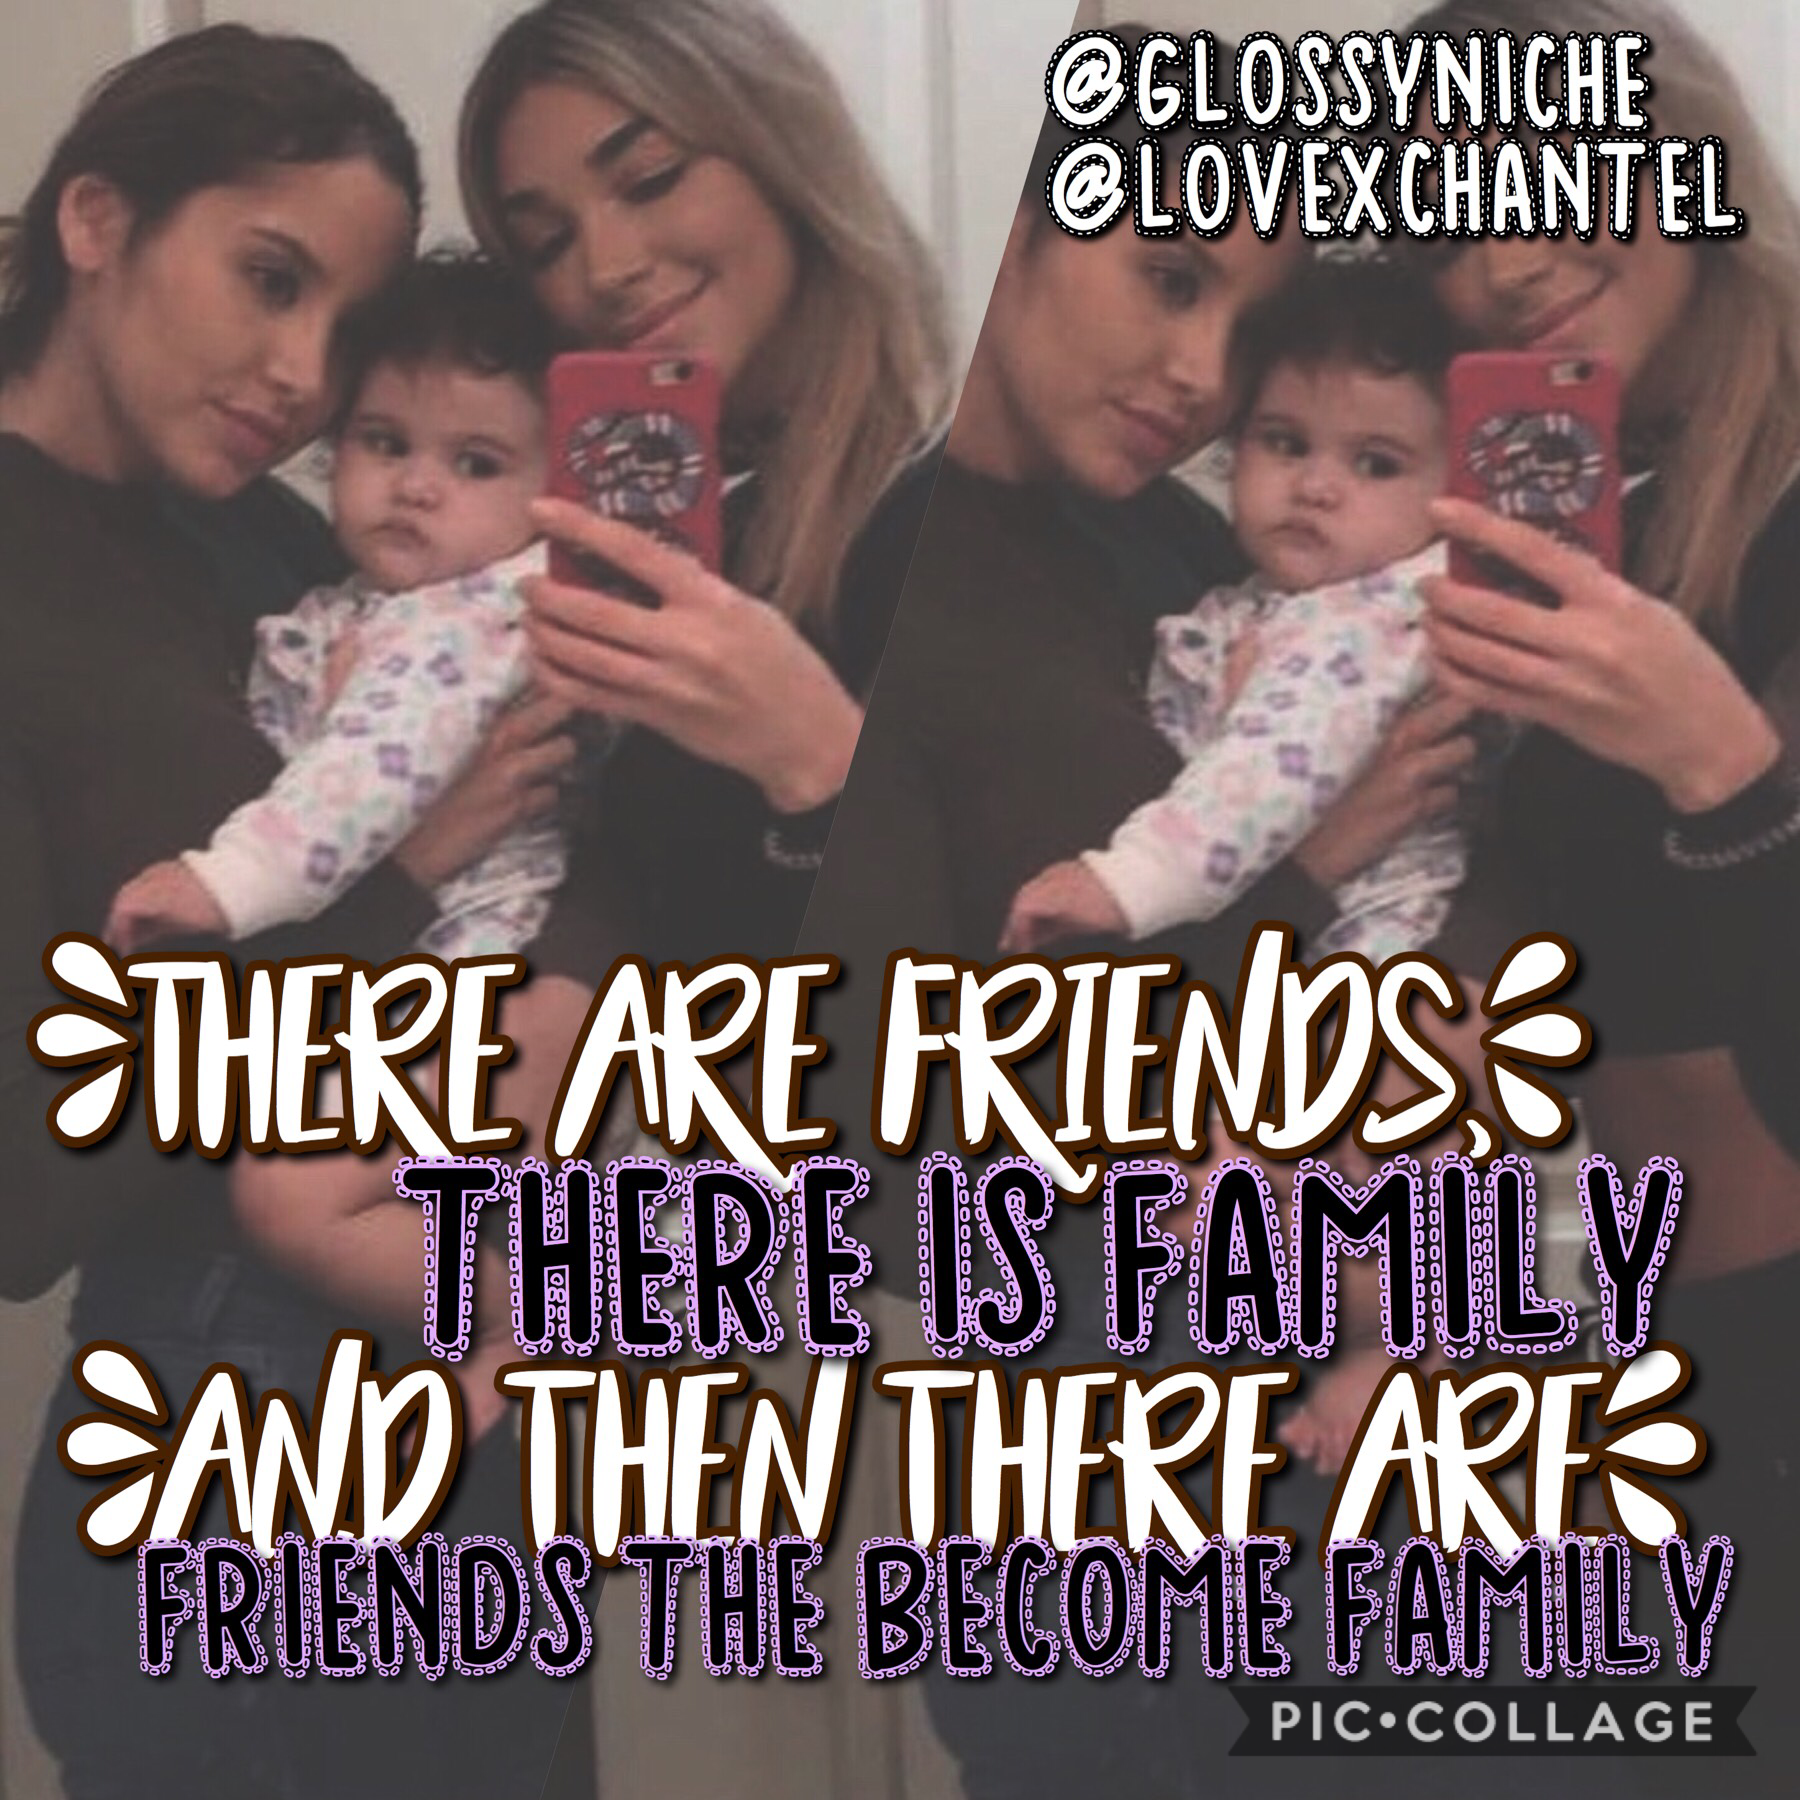 tap😍


This was a collab with my bestie @glossyniche she did the text and I chose the picture and did the collage. I love how it turned out!!!

quote-there are friends, there is family,and then there are friends that become family.😍